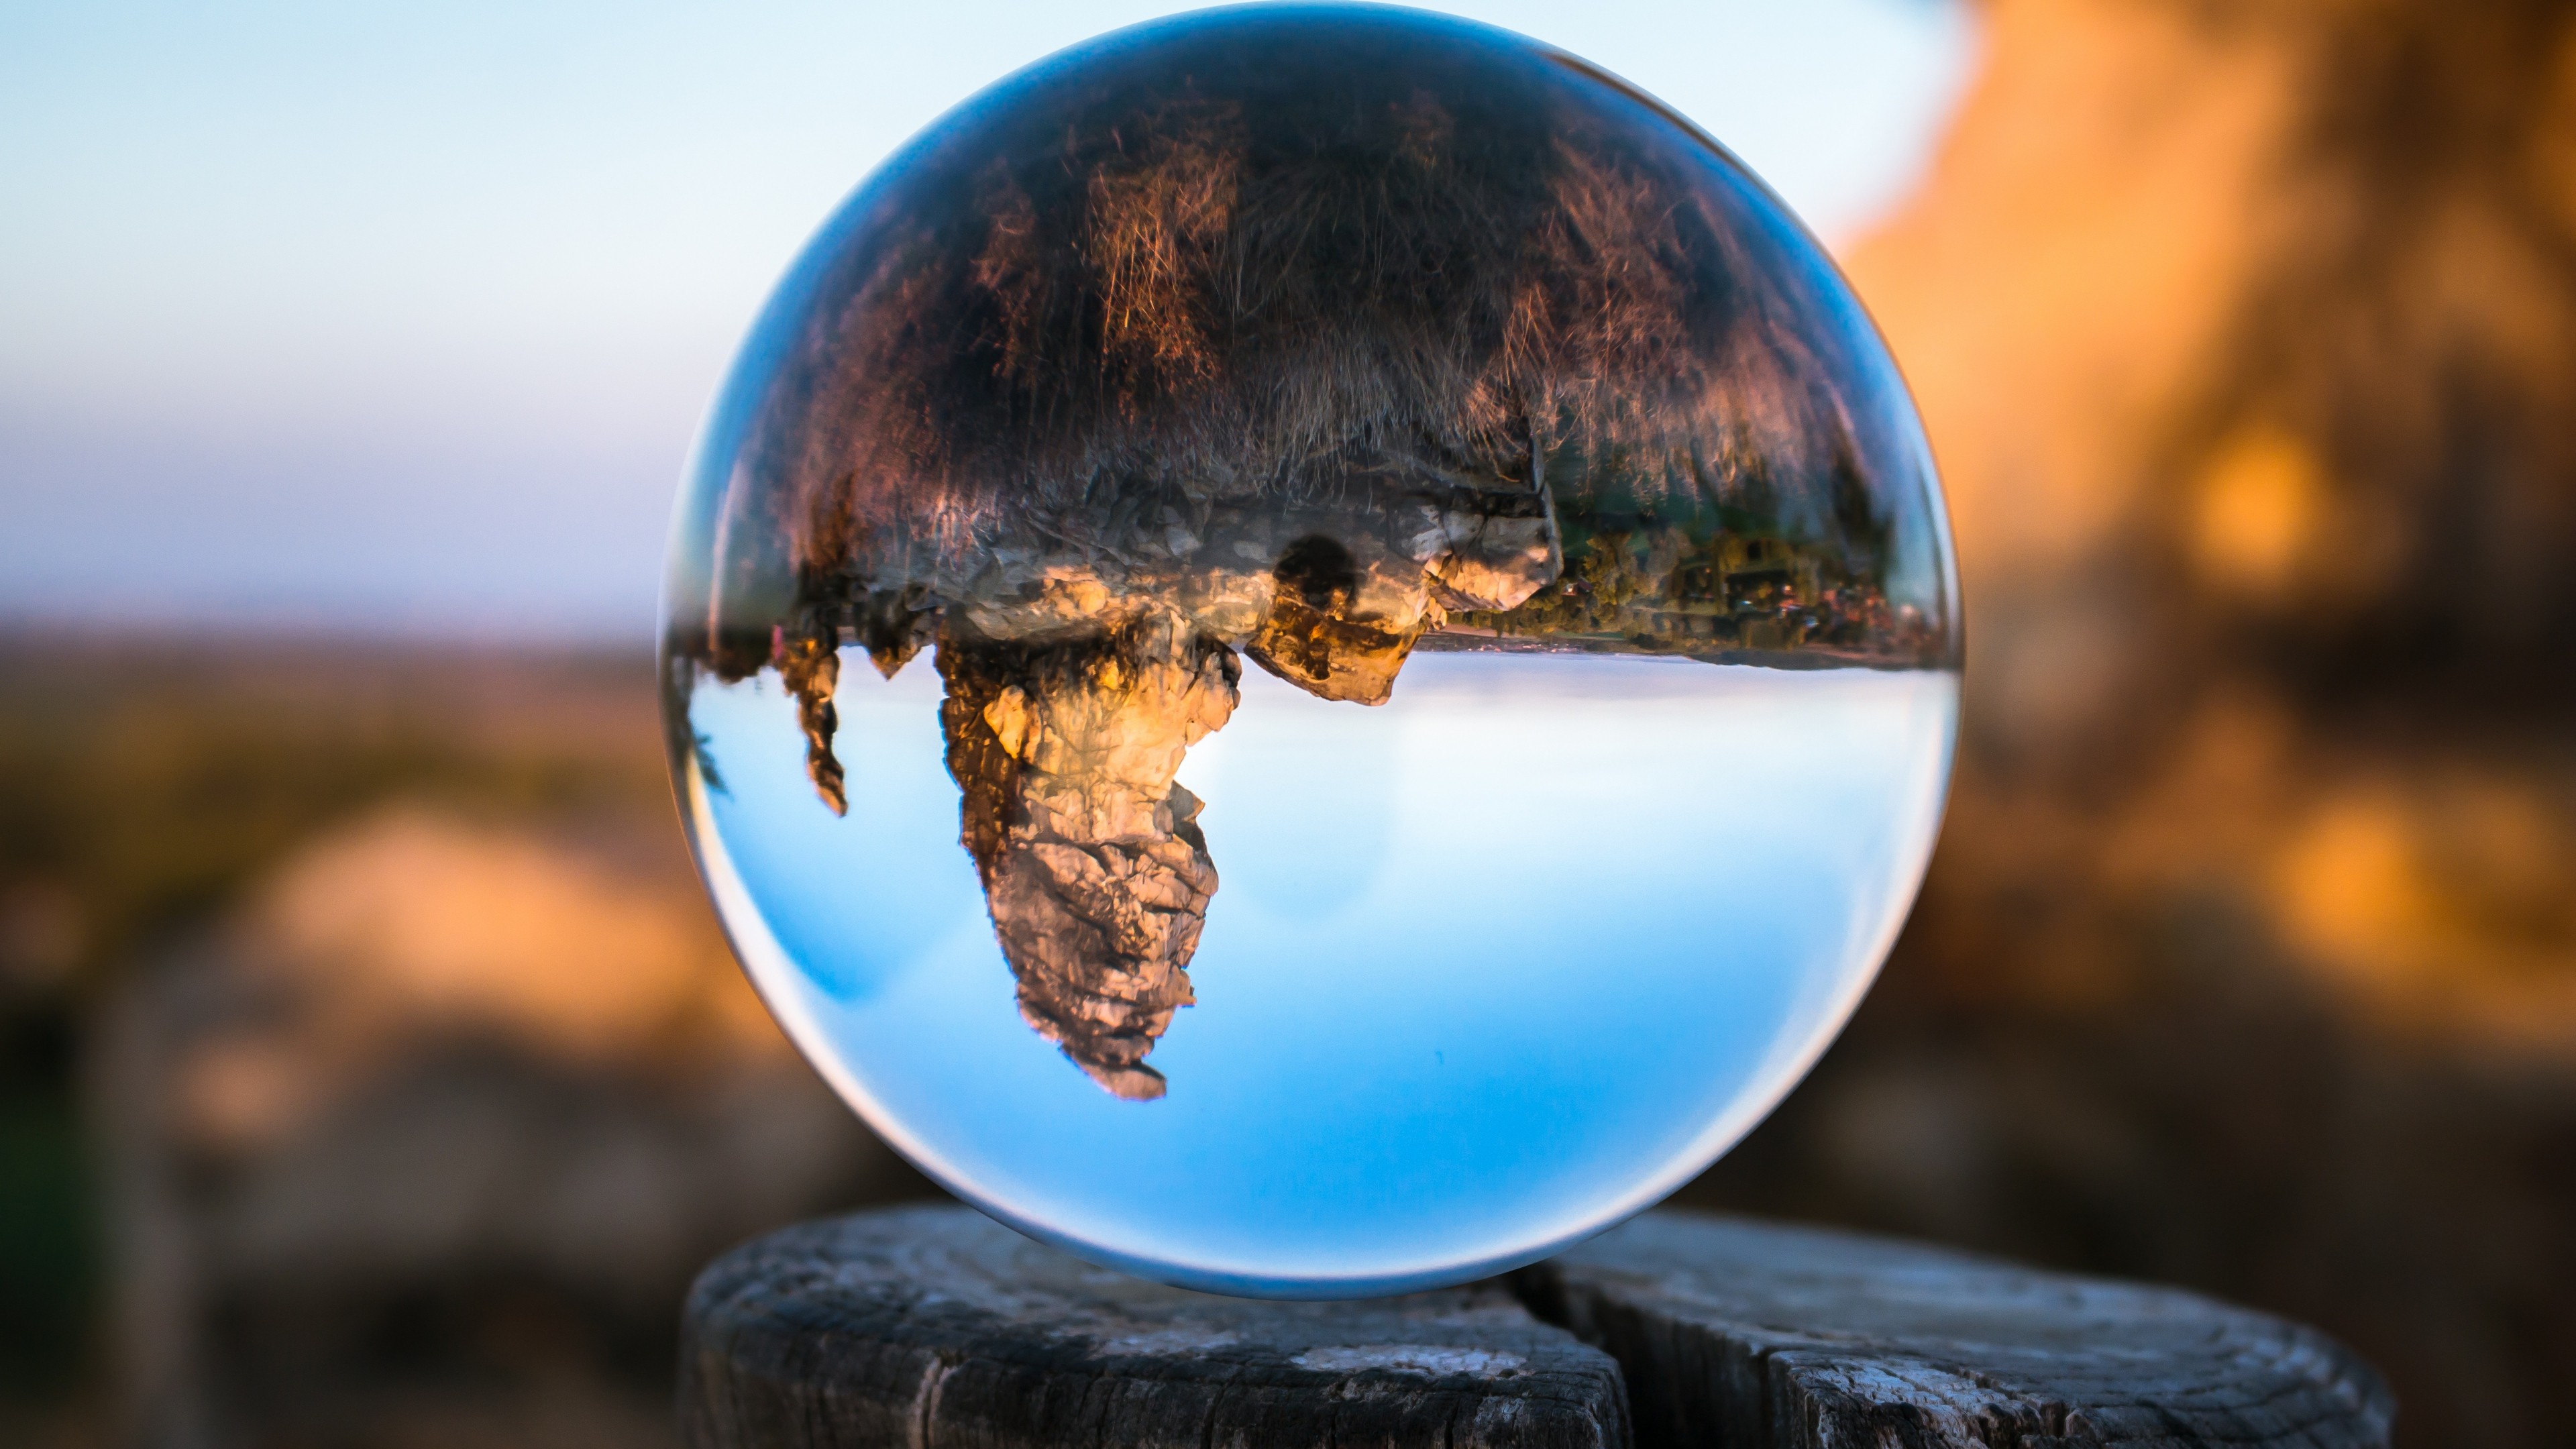 General 3840x2160 nature landscape trunks wood sphere glass reflection mountains rocks upside down trees depth of field clear sky Germany